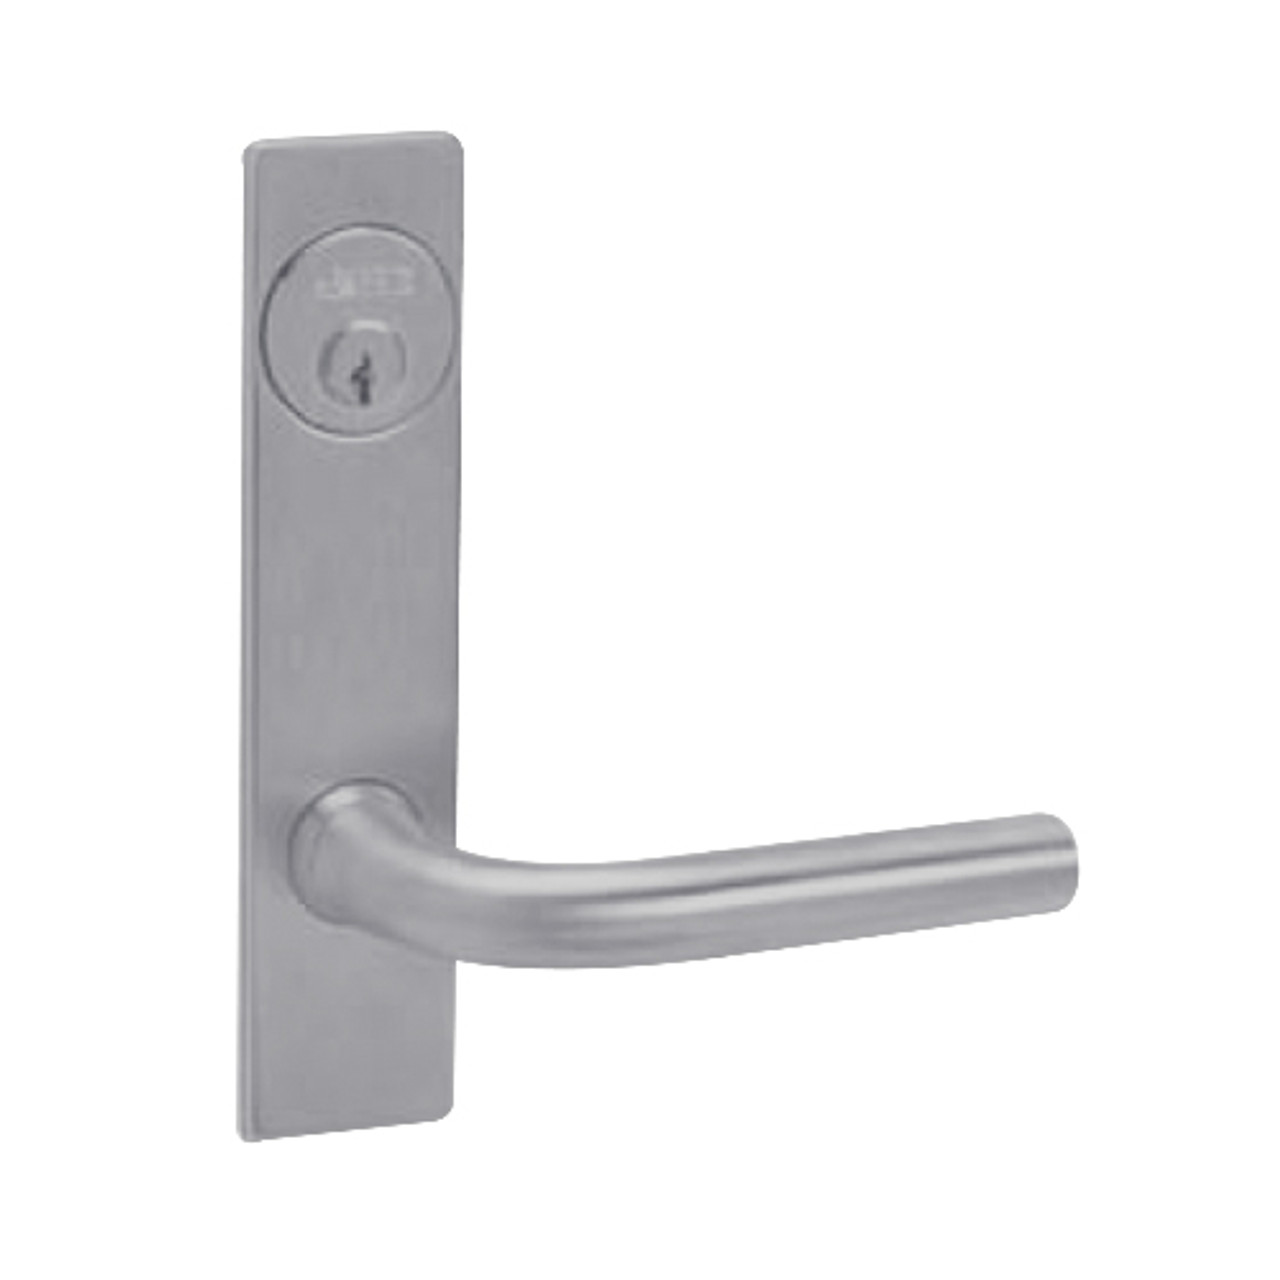 ML2068-RWM-626 Corbin Russwin ML2000 Series Mortise Privacy or Apartment Locksets with Regis Lever in Satin Chrome